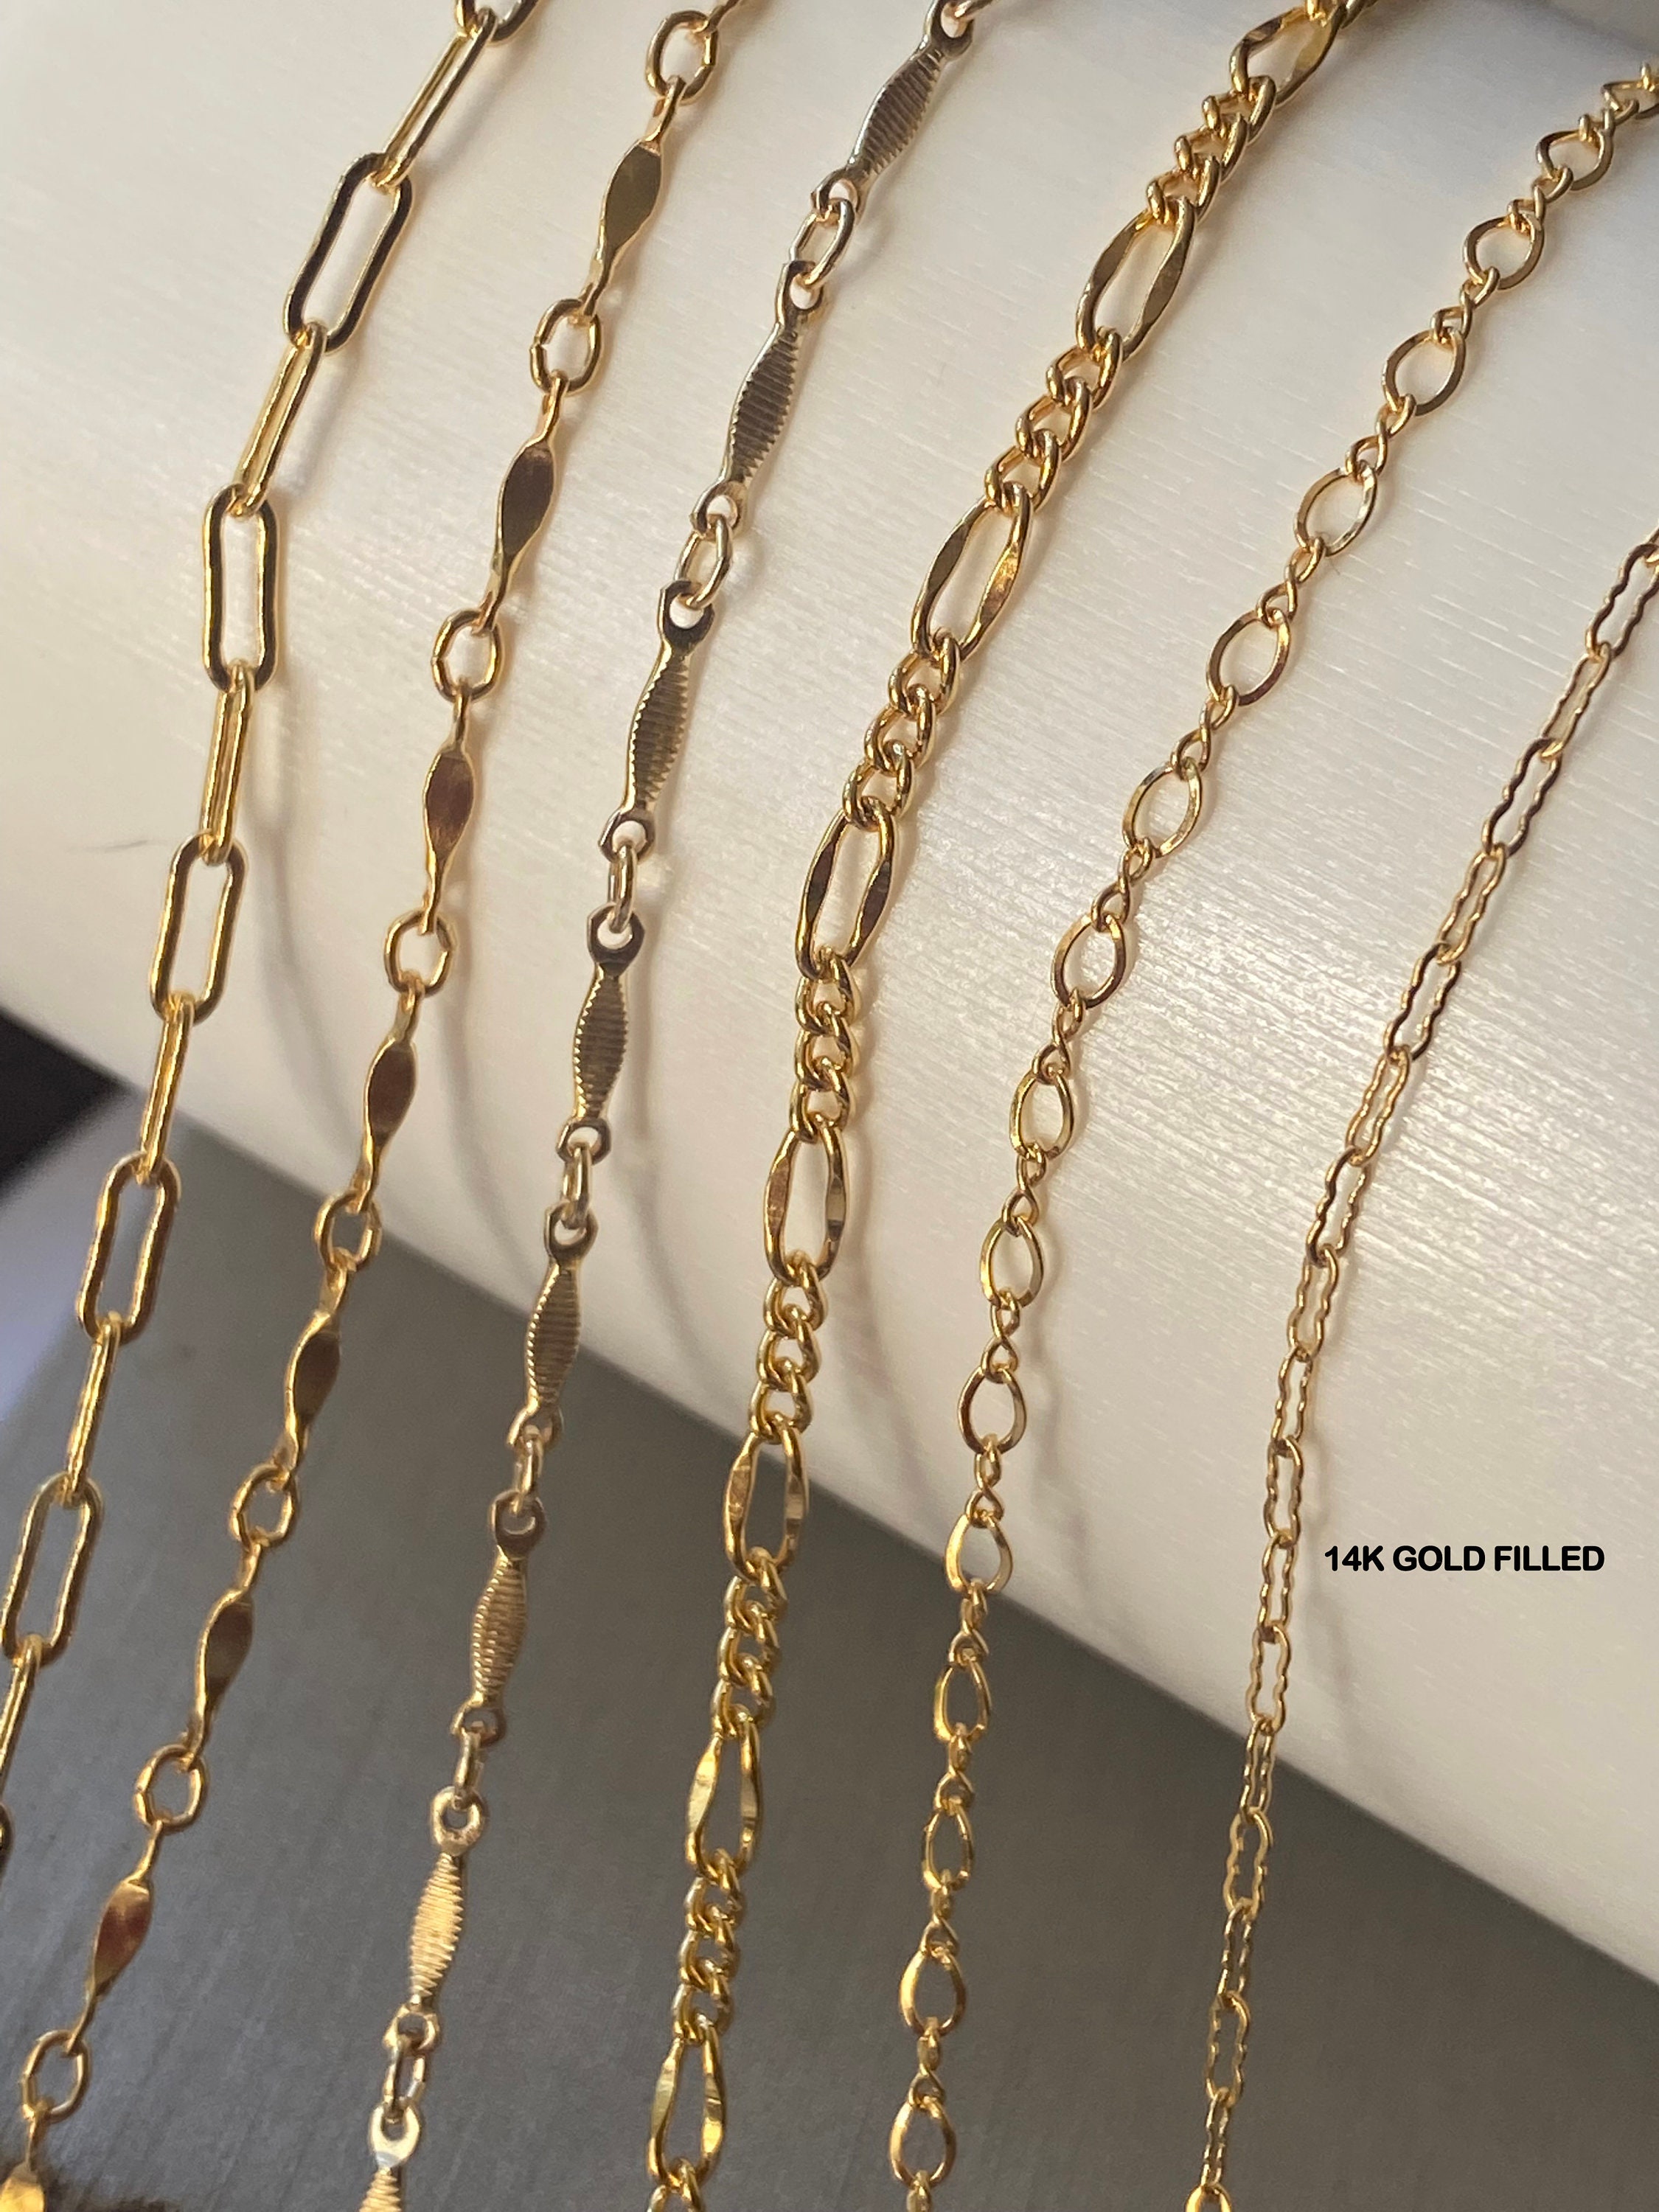 Wholesale Light Flat Bar Cable Chain By-the-Meter 14kt Gold Filled